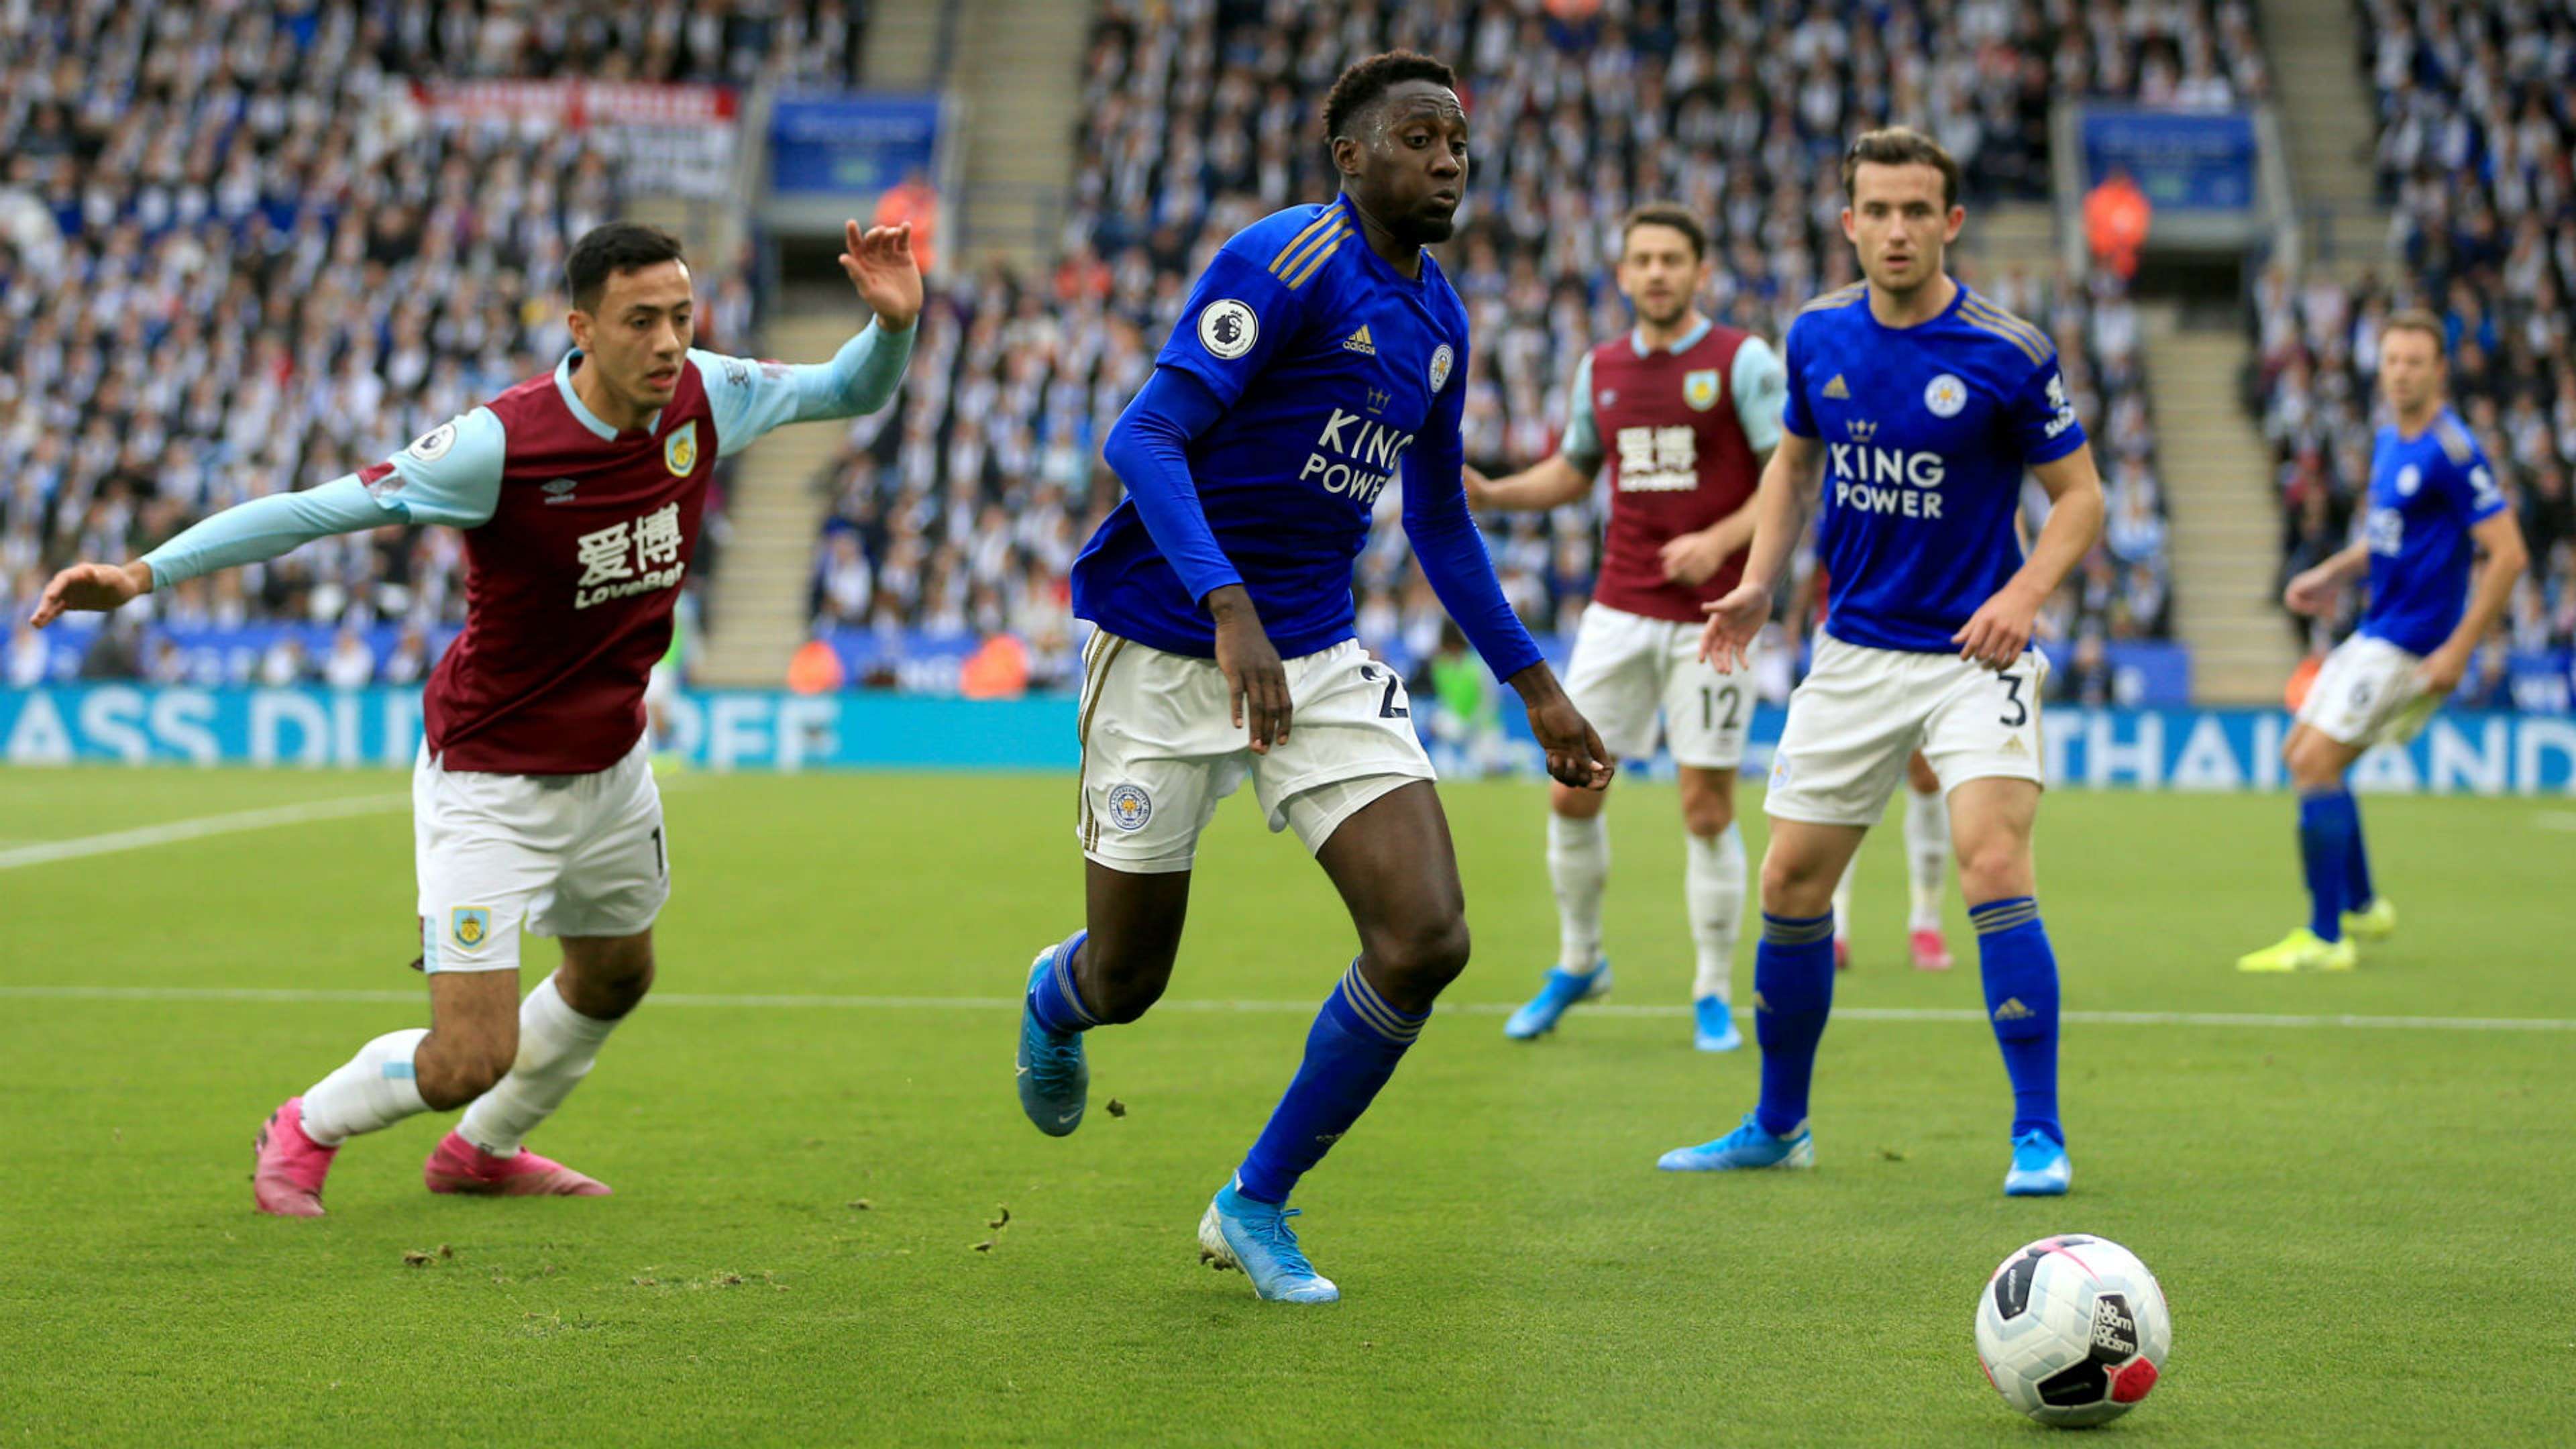 Wilfred Ndidi - Leicester City vs Burnley October 2019